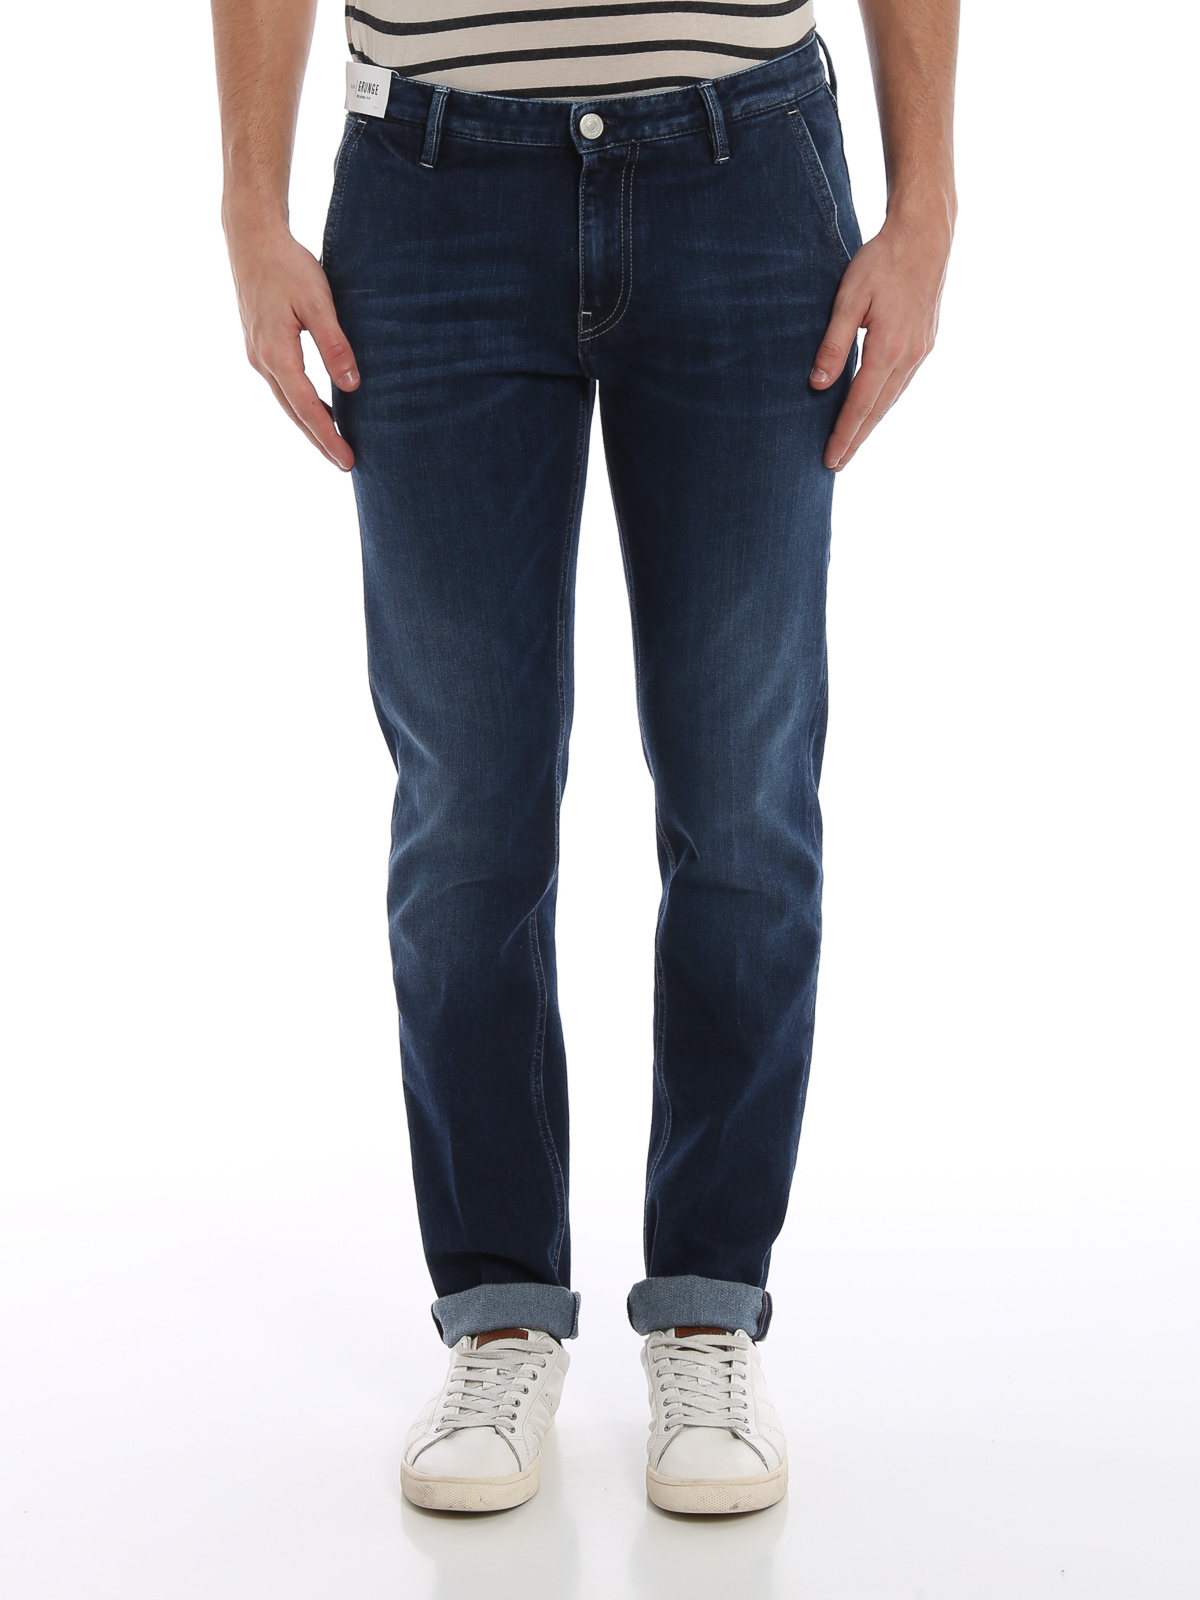 relaxed denim jeans